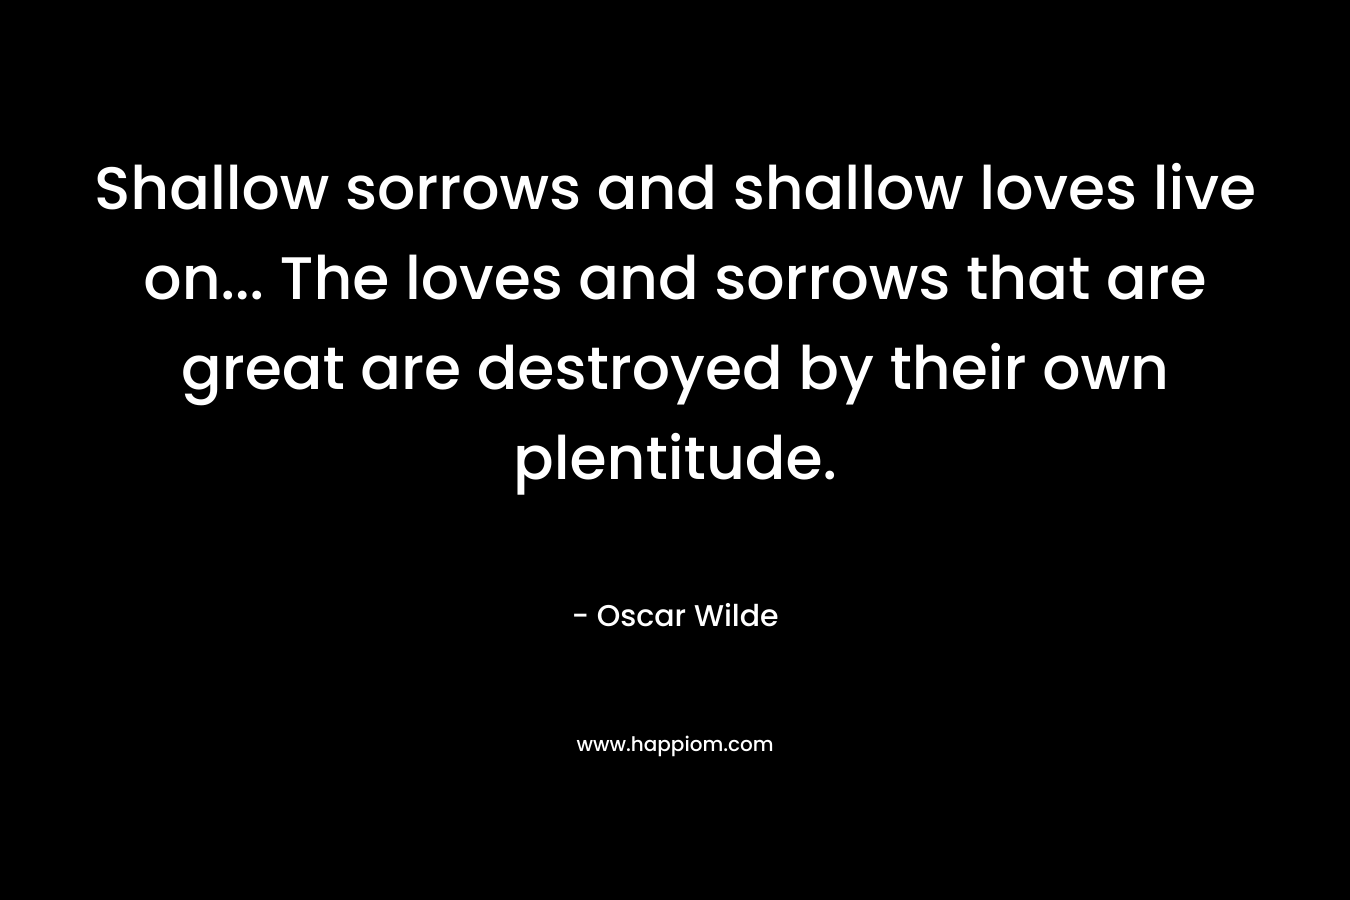 Shallow sorrows and shallow loves live on… The loves and sorrows that are great are destroyed by their own plentitude. – Oscar Wilde